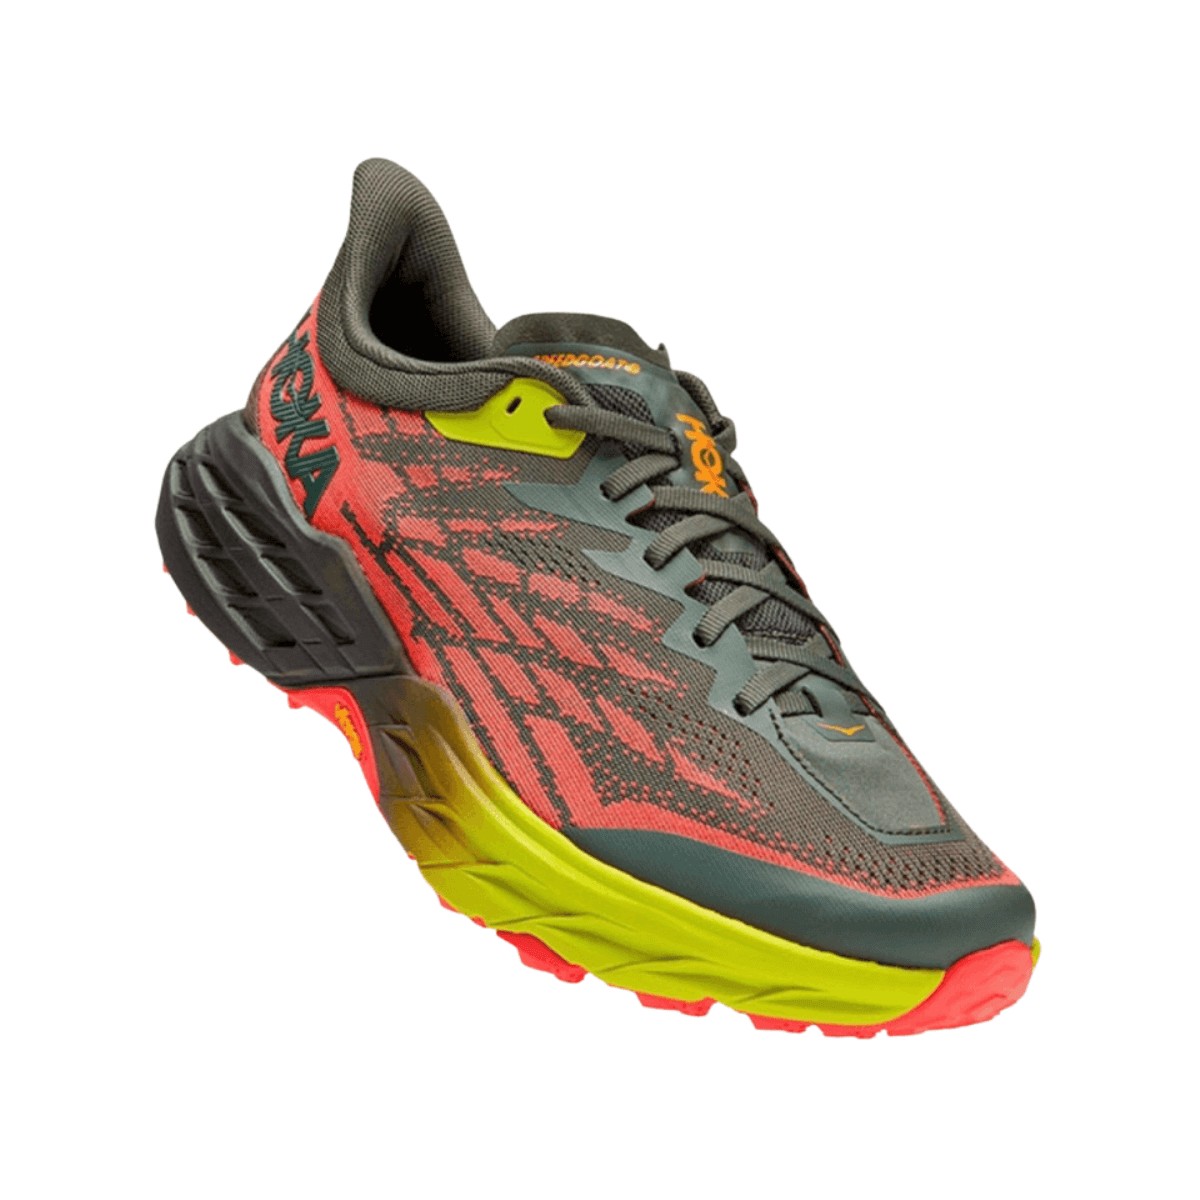 Chaussures Hoka One One Speedgoat 5 Rouge Noir AW22, Taille EU 42